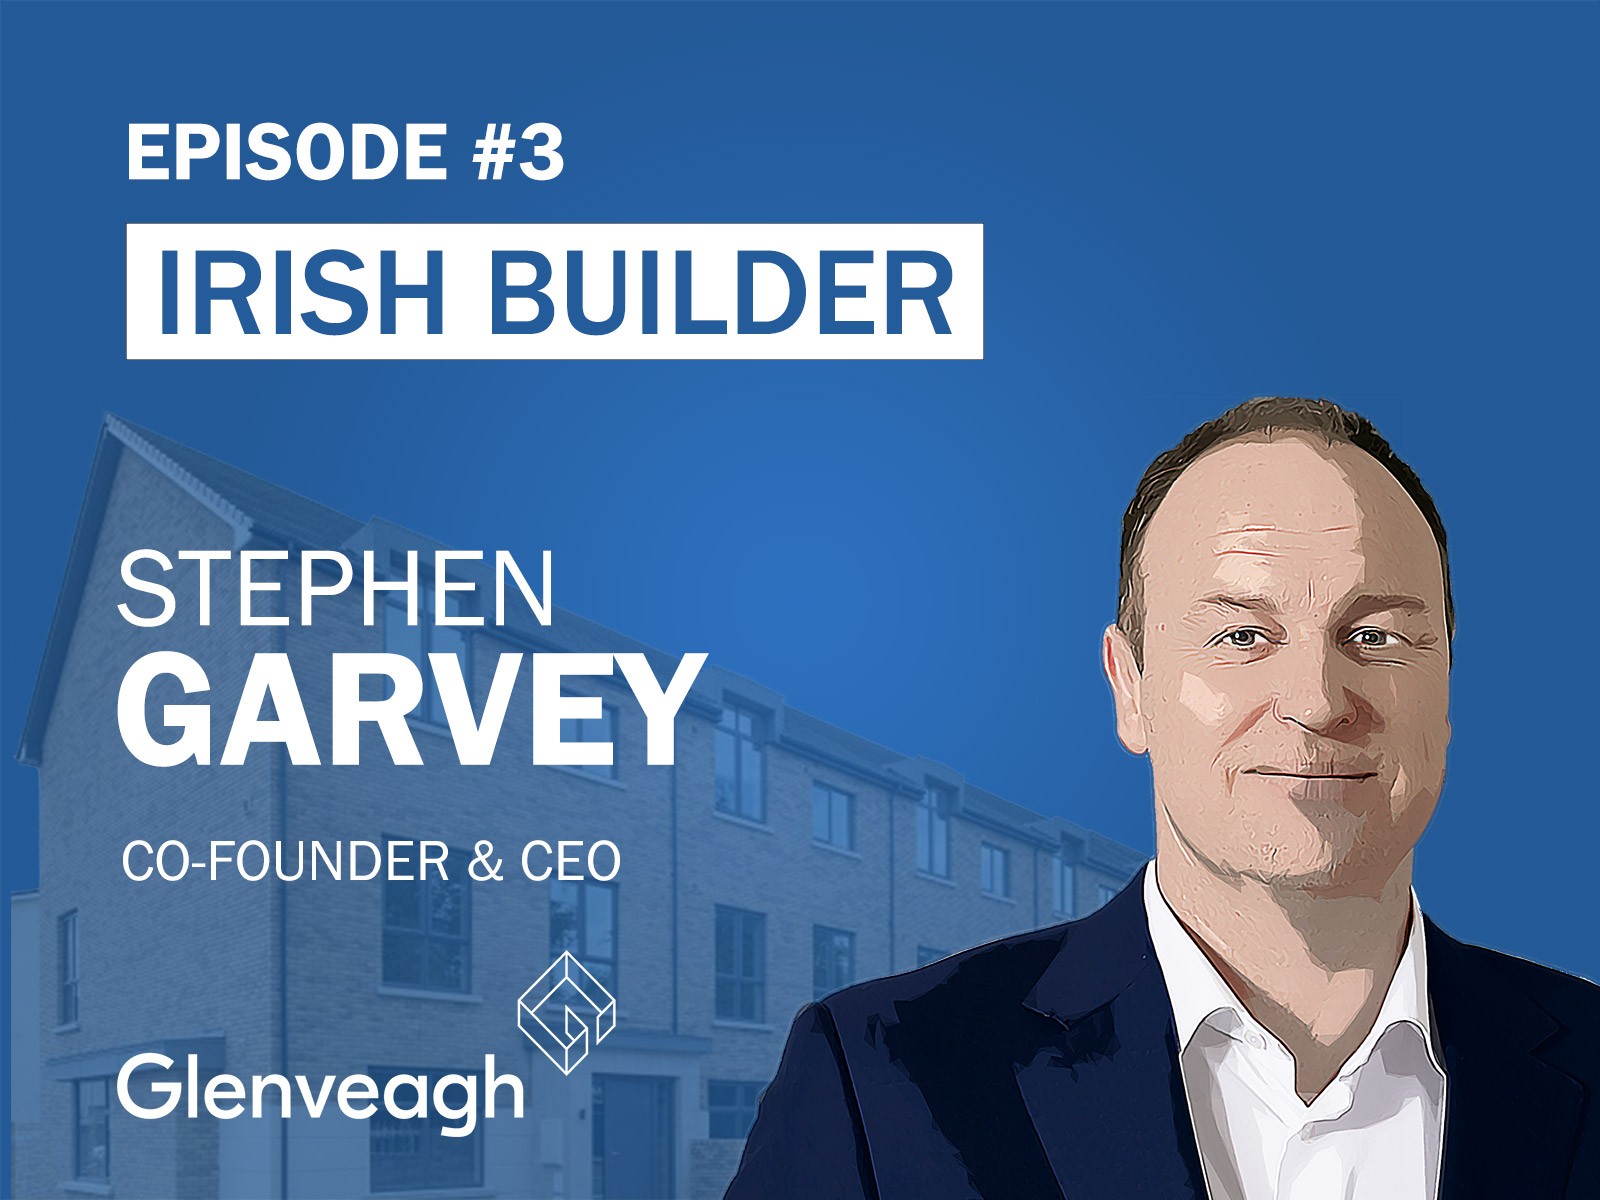 Stephen Garvey is co-founder and CEO of Glenveagh Properties, one of the largest home builders in Ireland. Stephen started building in his early twenties, successfully scaling his dad’s contracting business, before launching Bridgedale Homes in 2003. In 2017, he partnered with global asset manager Oaktree, merging Bridgedale into Glenveagh. Now, Stephen is laser-focused on dominating the Irish housing market by disrupting the traditional business model, including building his own drone department.